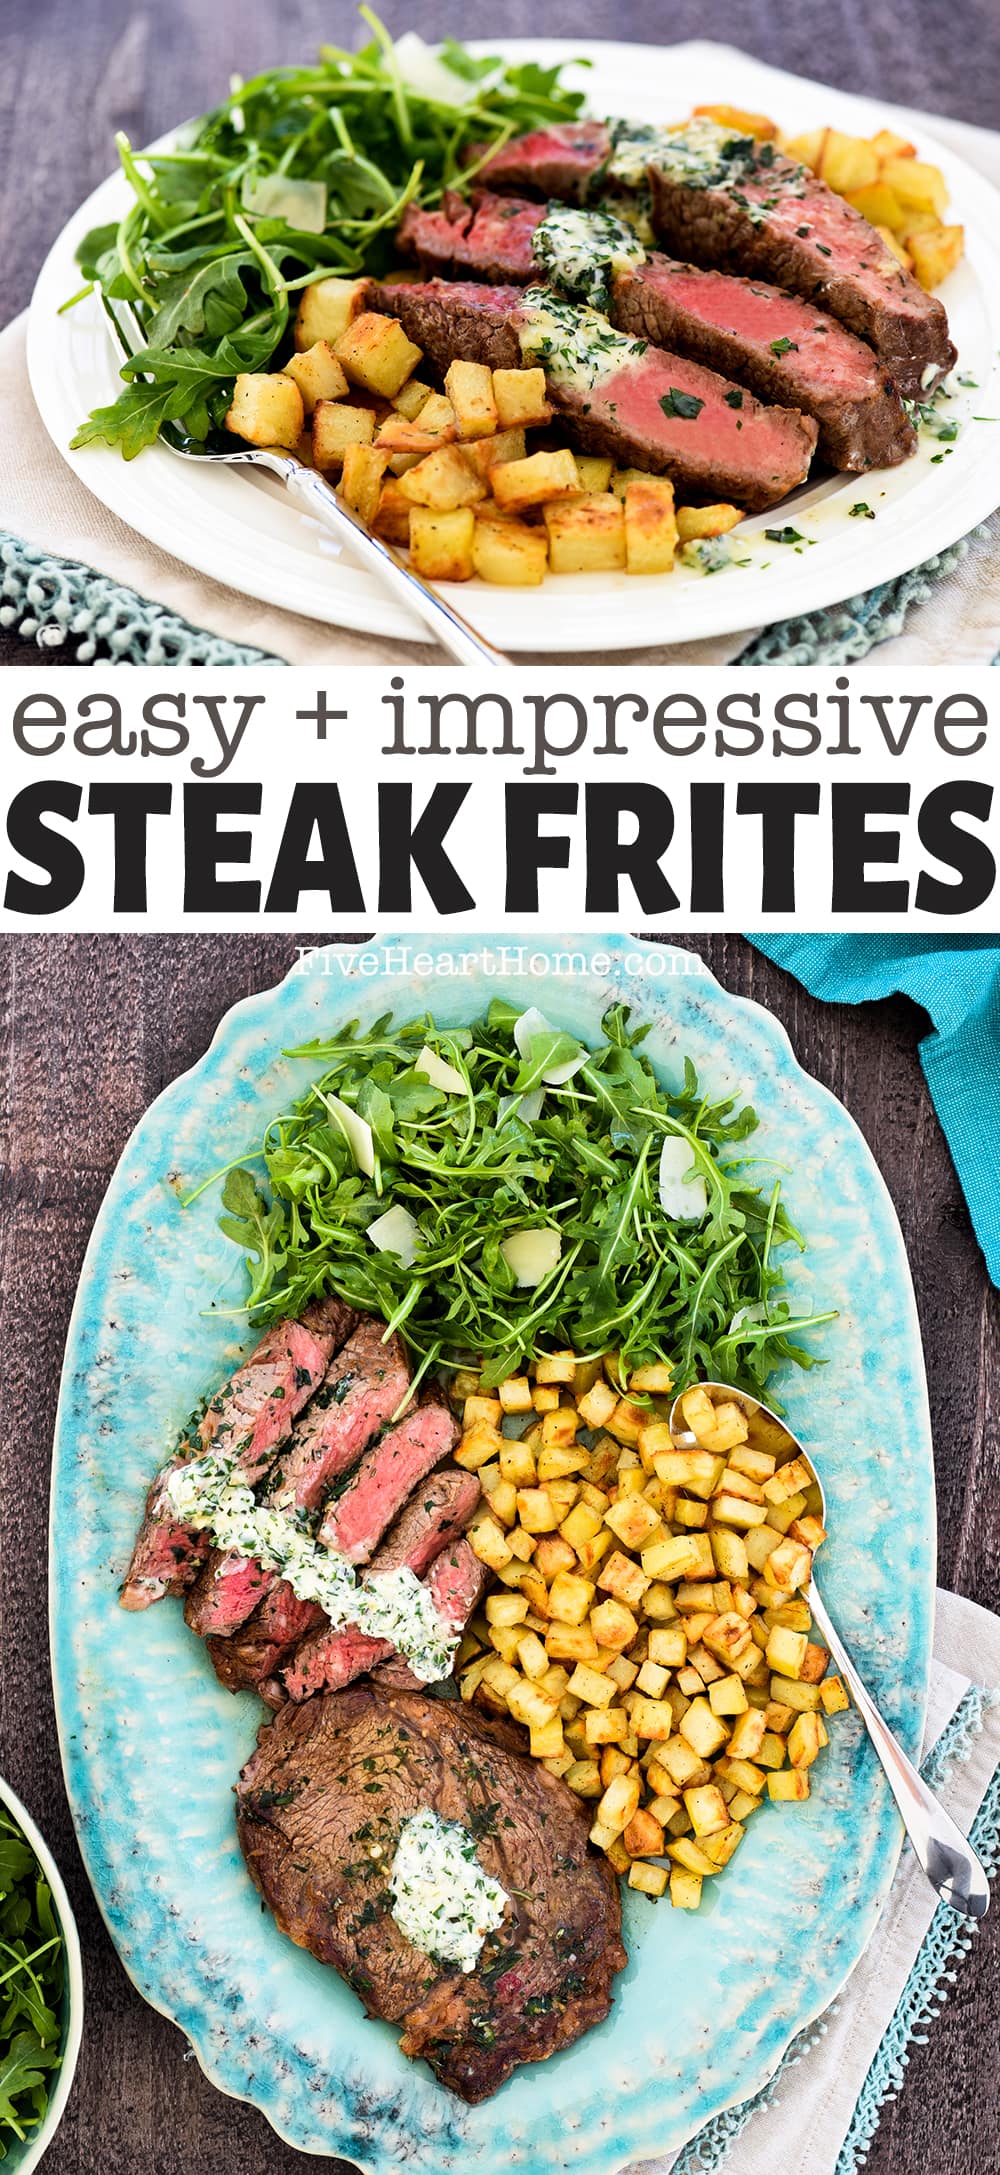 Steak Frites ~ a classic meal of "steak and fries" that's simple yet scrumptious. This version features succulent ribeyes basted in herb butter atop lightened-up roasted potatoes for a home-cooked dinner that's impressive and special for being so quick and easy! | FiveHeartHome.com via @fivehearthome